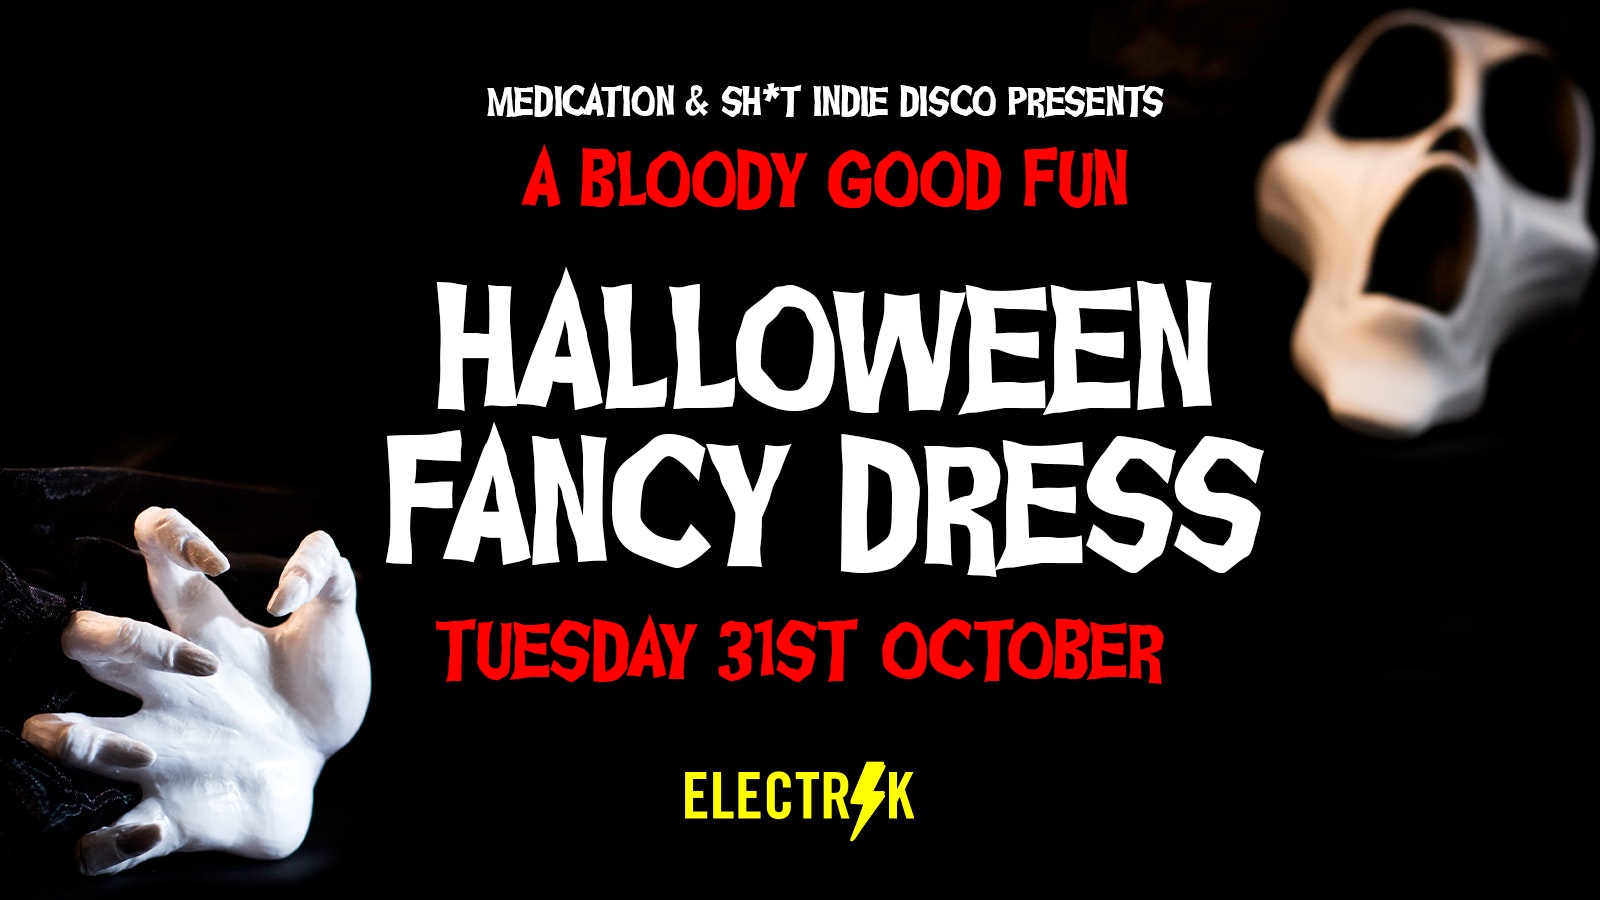 SOLD OUT! Huge Halloween Fancy Dress Party at Electrik with Shit Indie Disco & Medication